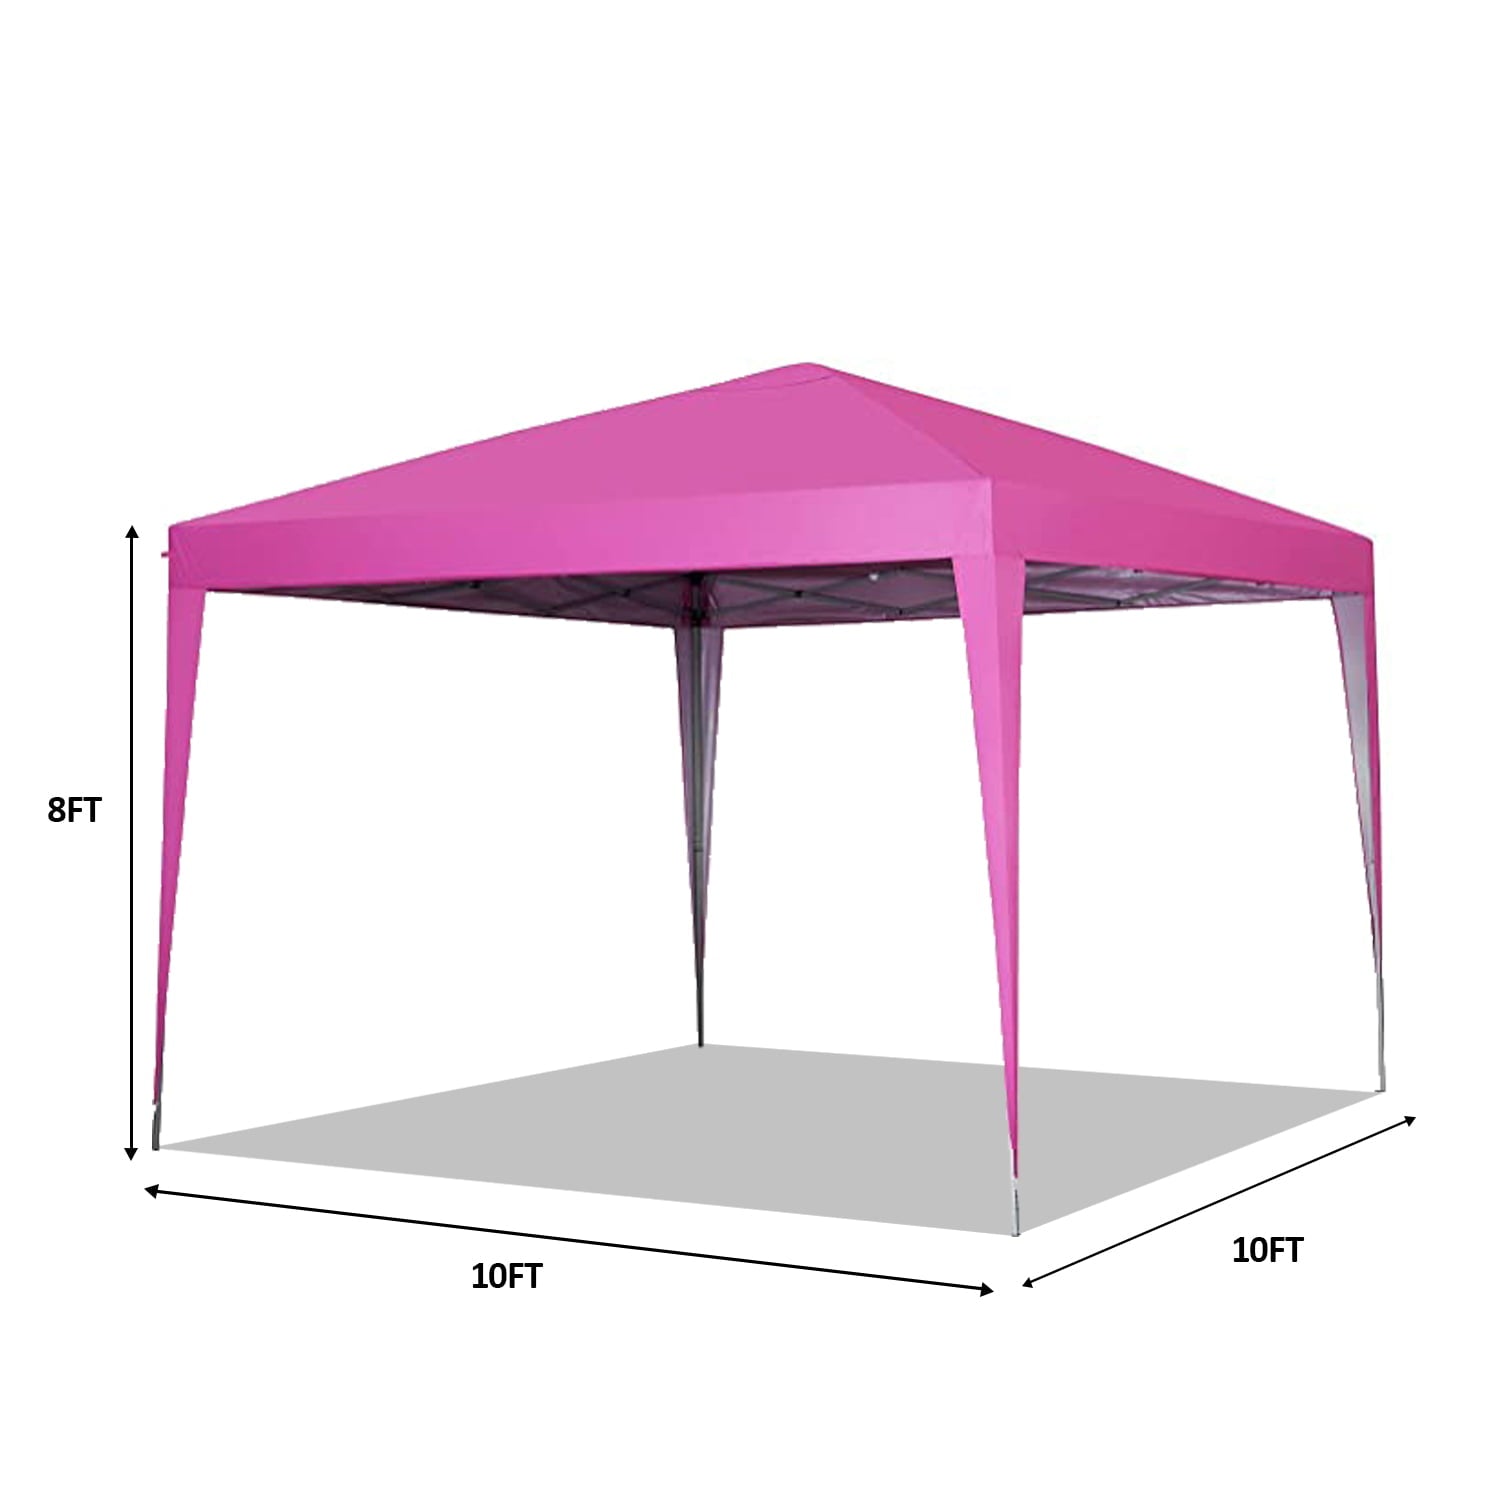 Wesfital 10x10 Ft Outdoor Pop Up Canopy Tent Instant Shelter Pop-Up Sun Camping Tent, Pink